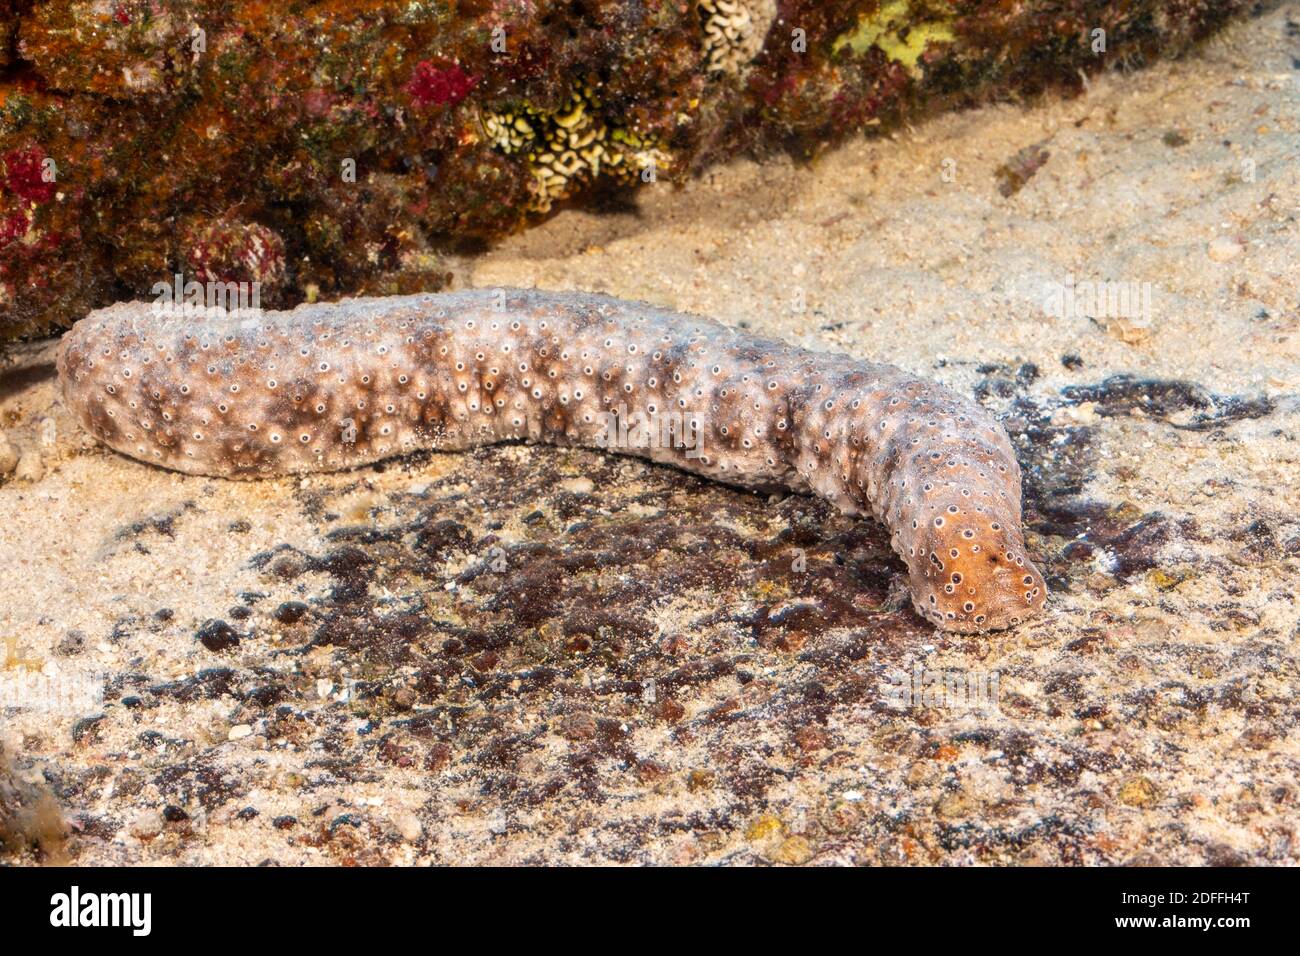 This sea cucumber, Holothuria sp., has yet to be scientifically identified, Hawaii. It is uncommon and thought to be endemic. Stock Photo